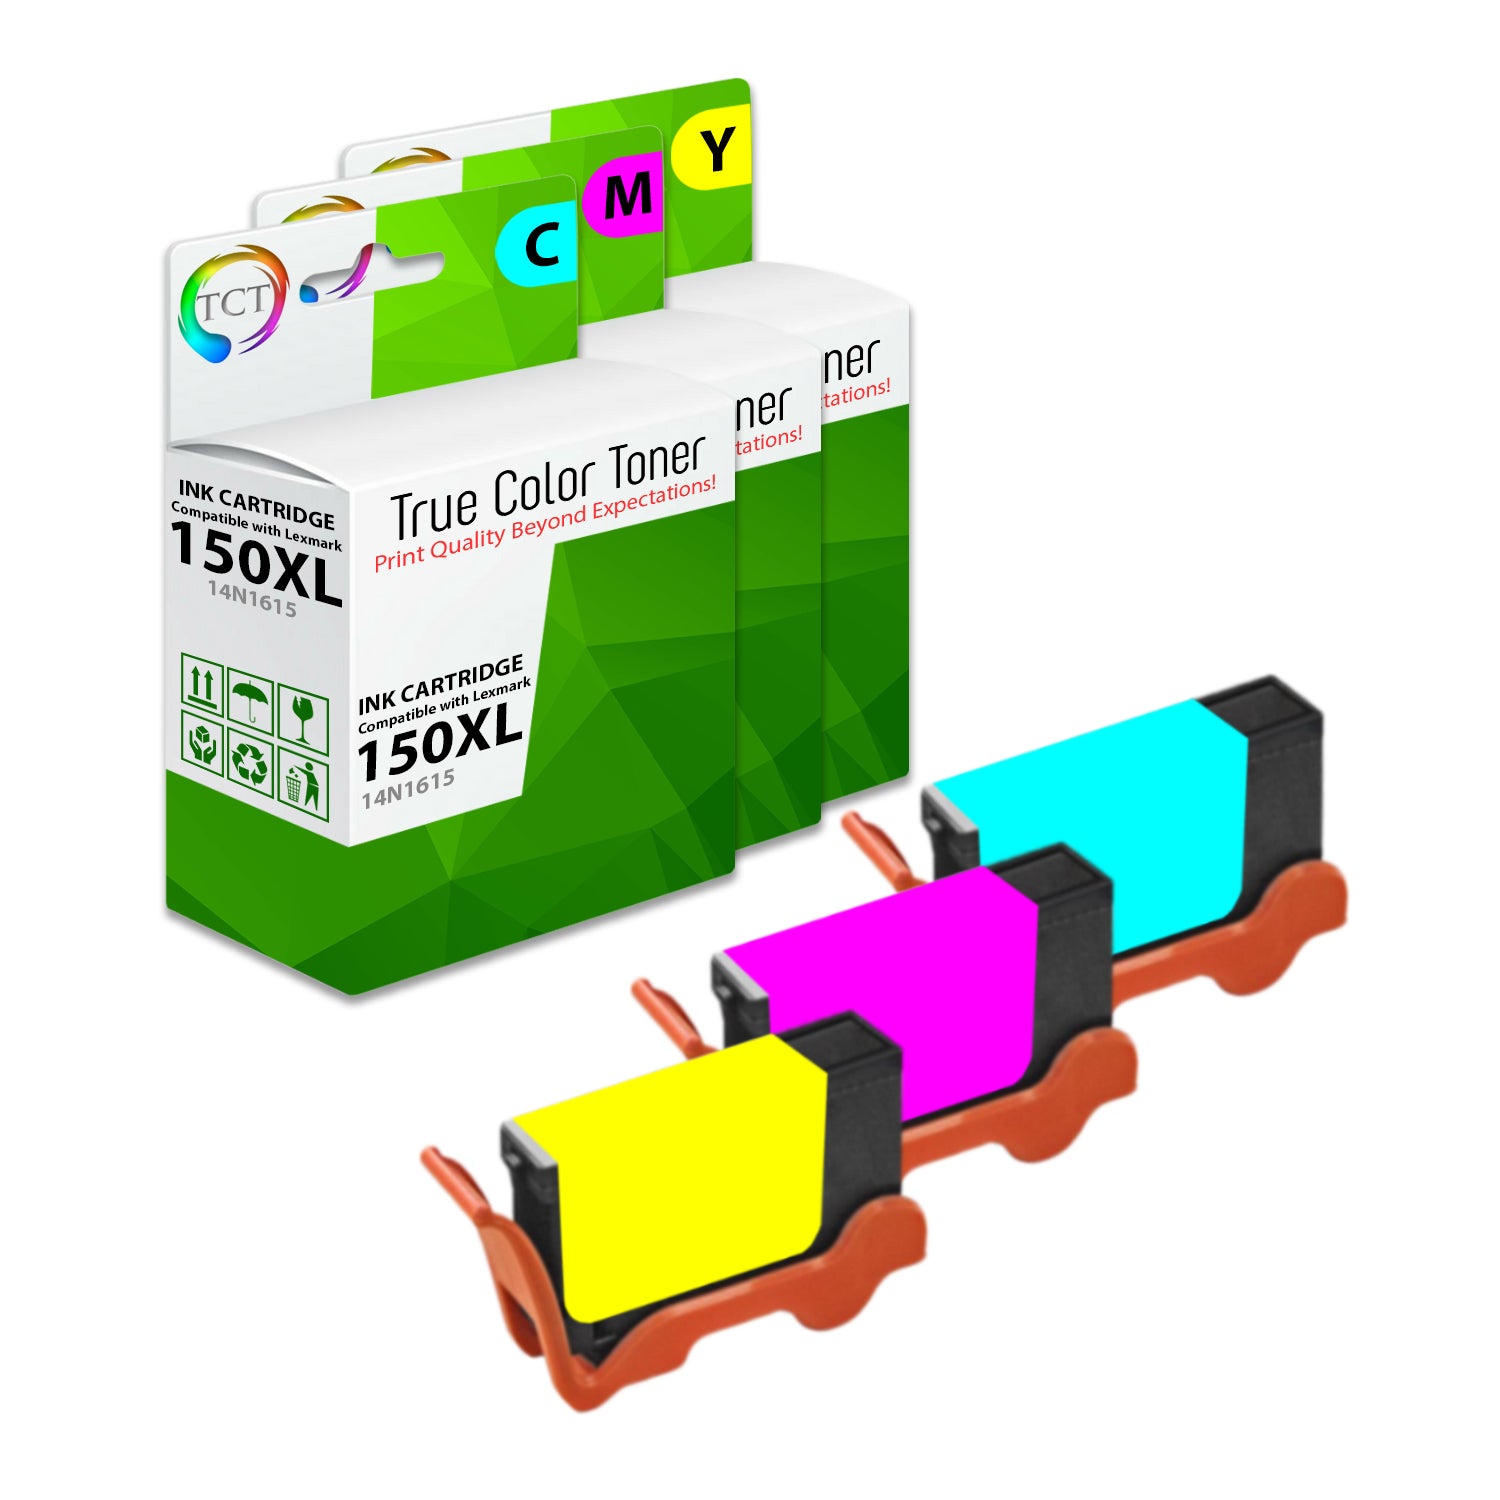 TCT Remanufactured High Yield Ink Cartridge Replacement for the Lexmark 150XL Series - 3PK (C, M, Y)